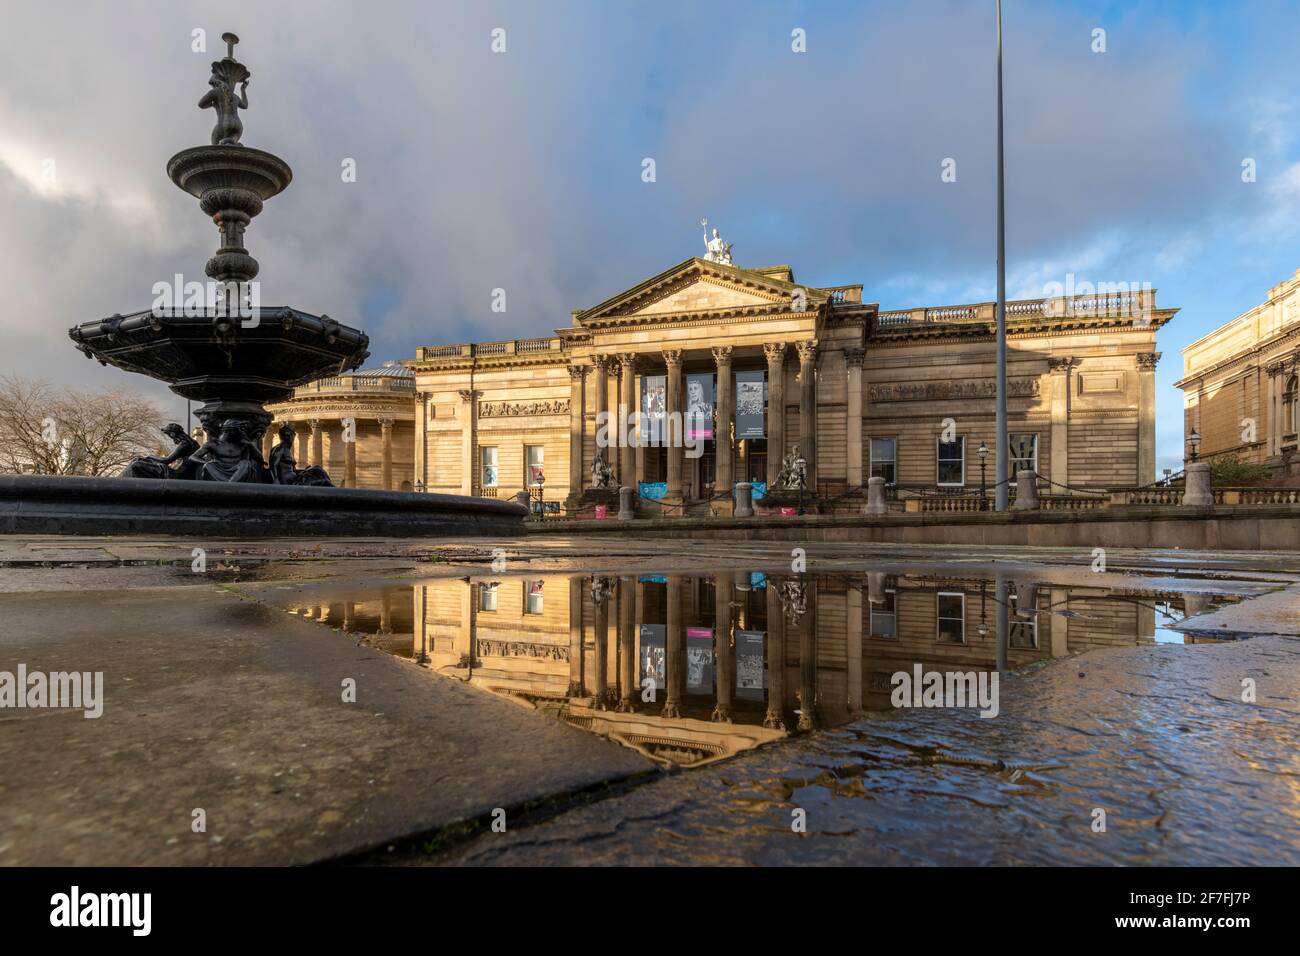 The Walker Art Gallery, Liverpool, Merseyside, Angleterre, Royaume-Uni, Europe Banque D'Images